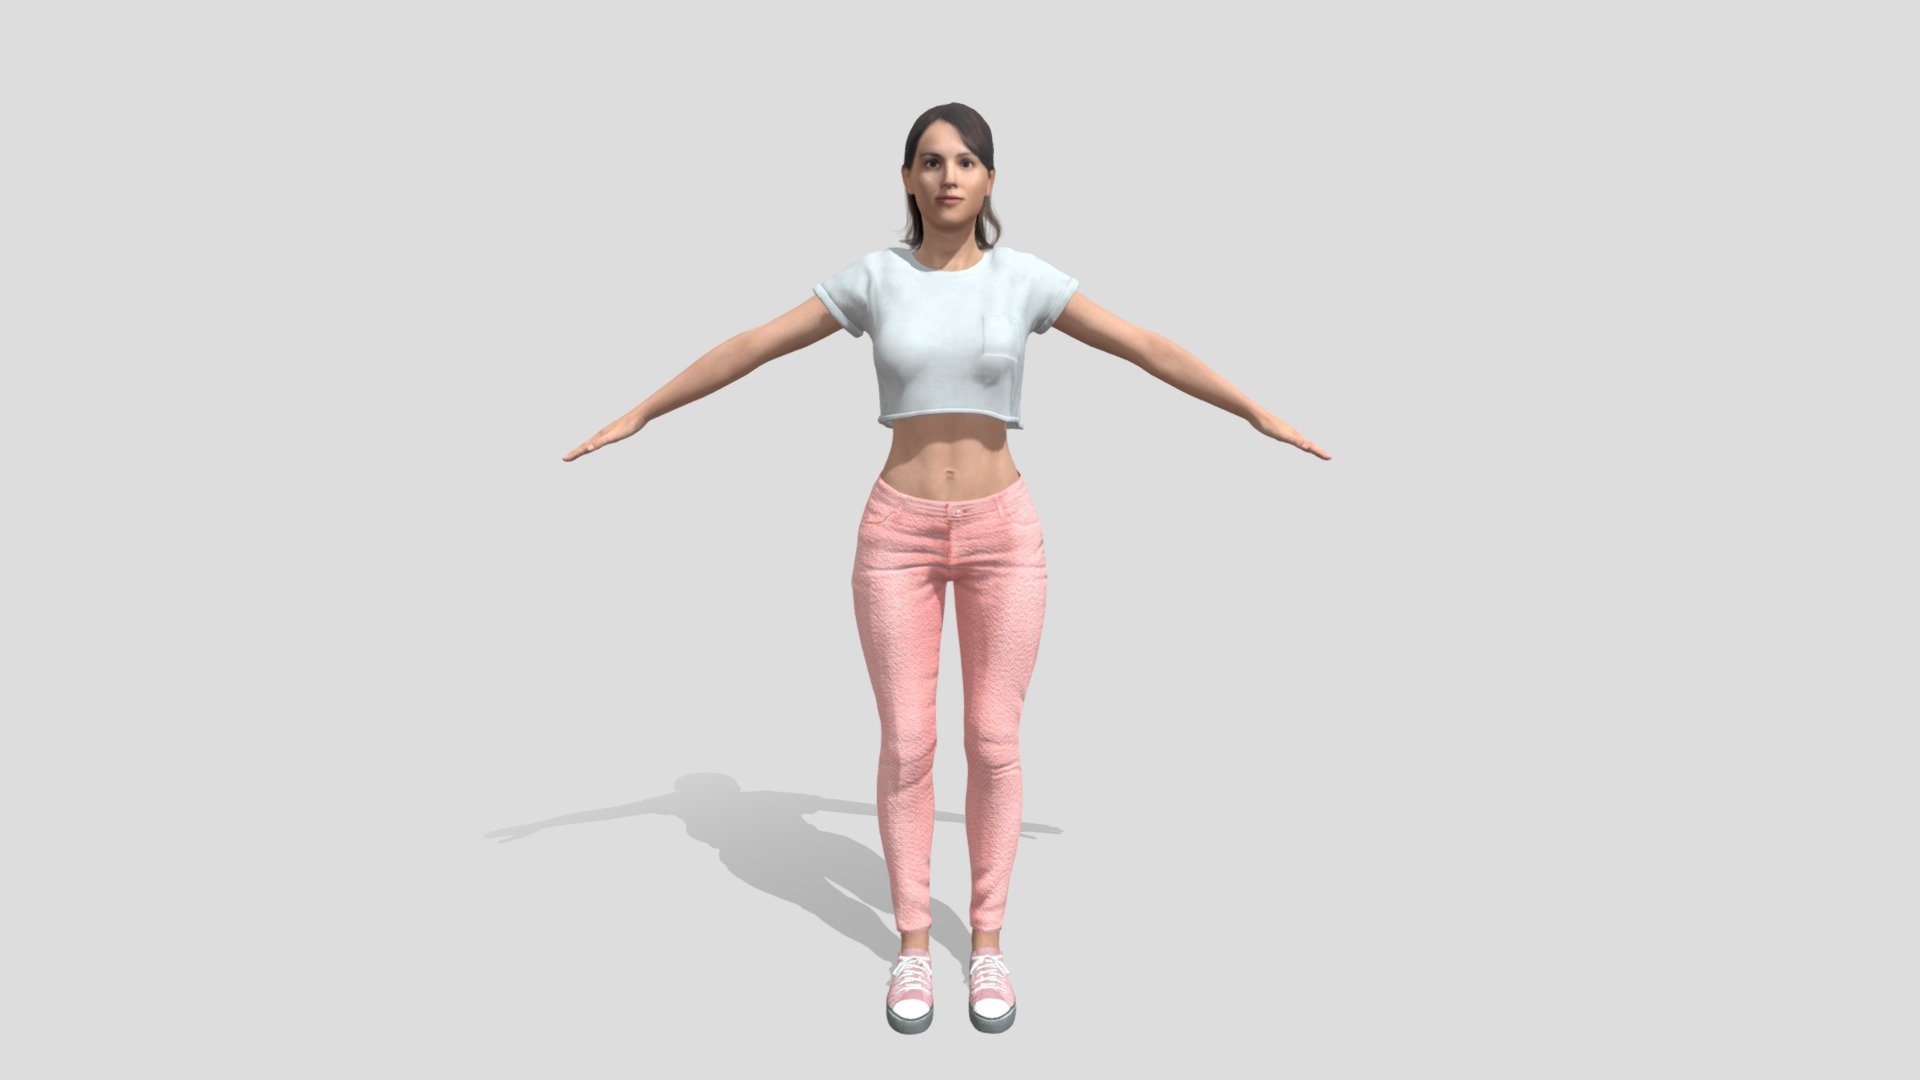 Created on Character Creator and export in FBX file.

To buy this, please contact b.gracadesign@hotmail.com - Kimberly - Original Pink Power Ranger - 3D model by bgraca 3d model